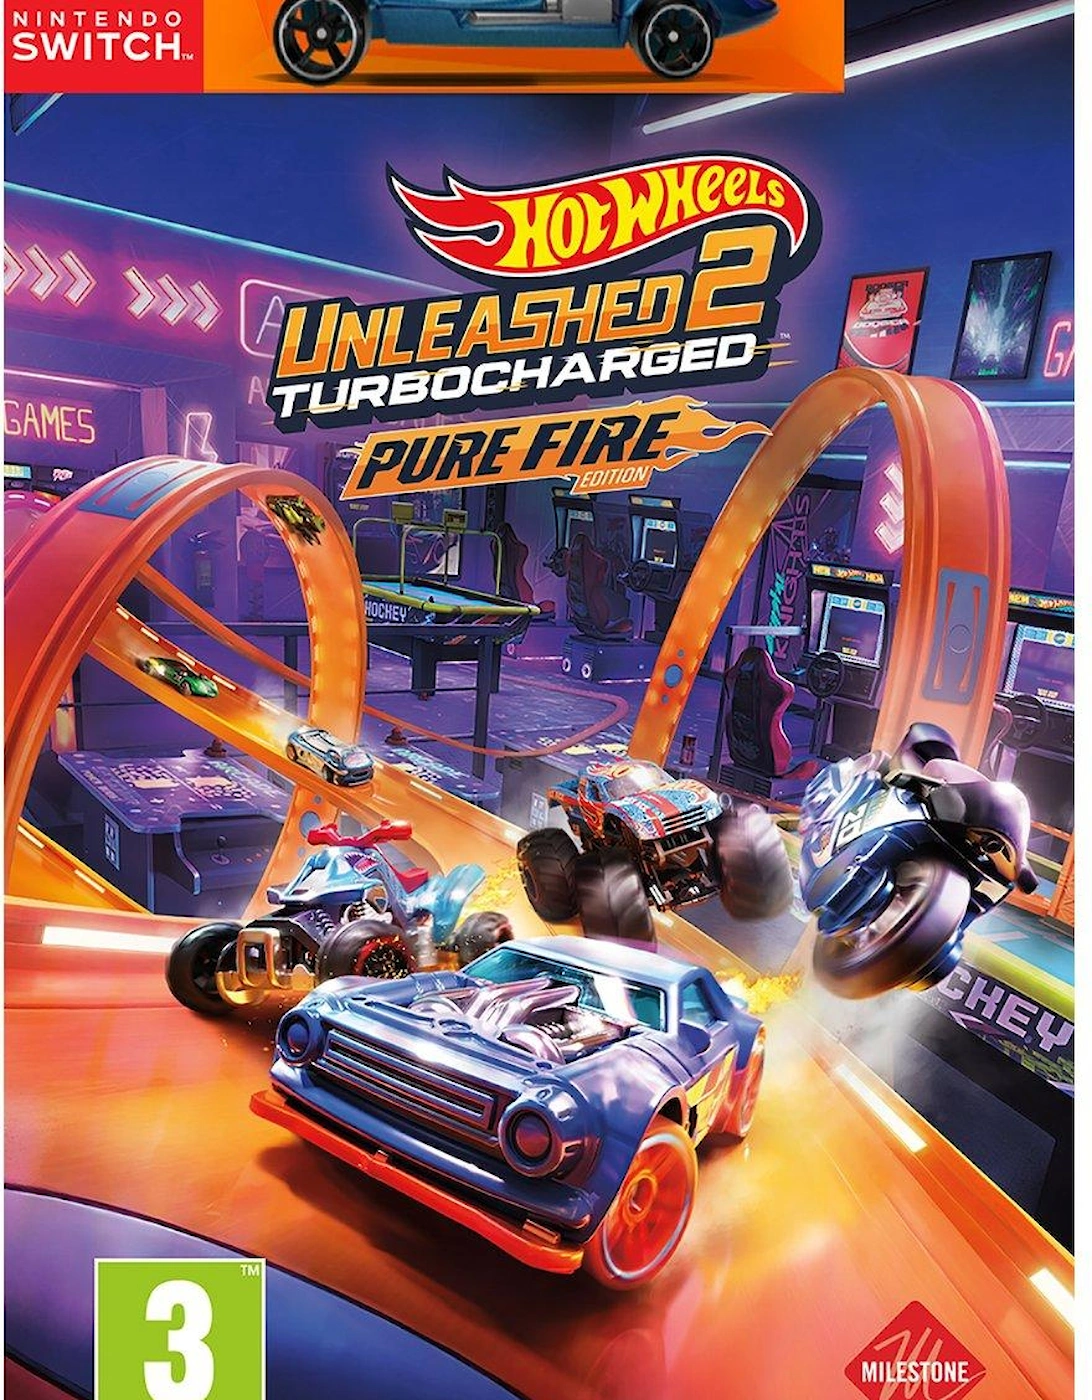 Switch Hot Wheels Unleashed 2 Turbocharged - Pure Fire Edition, 2 of 1